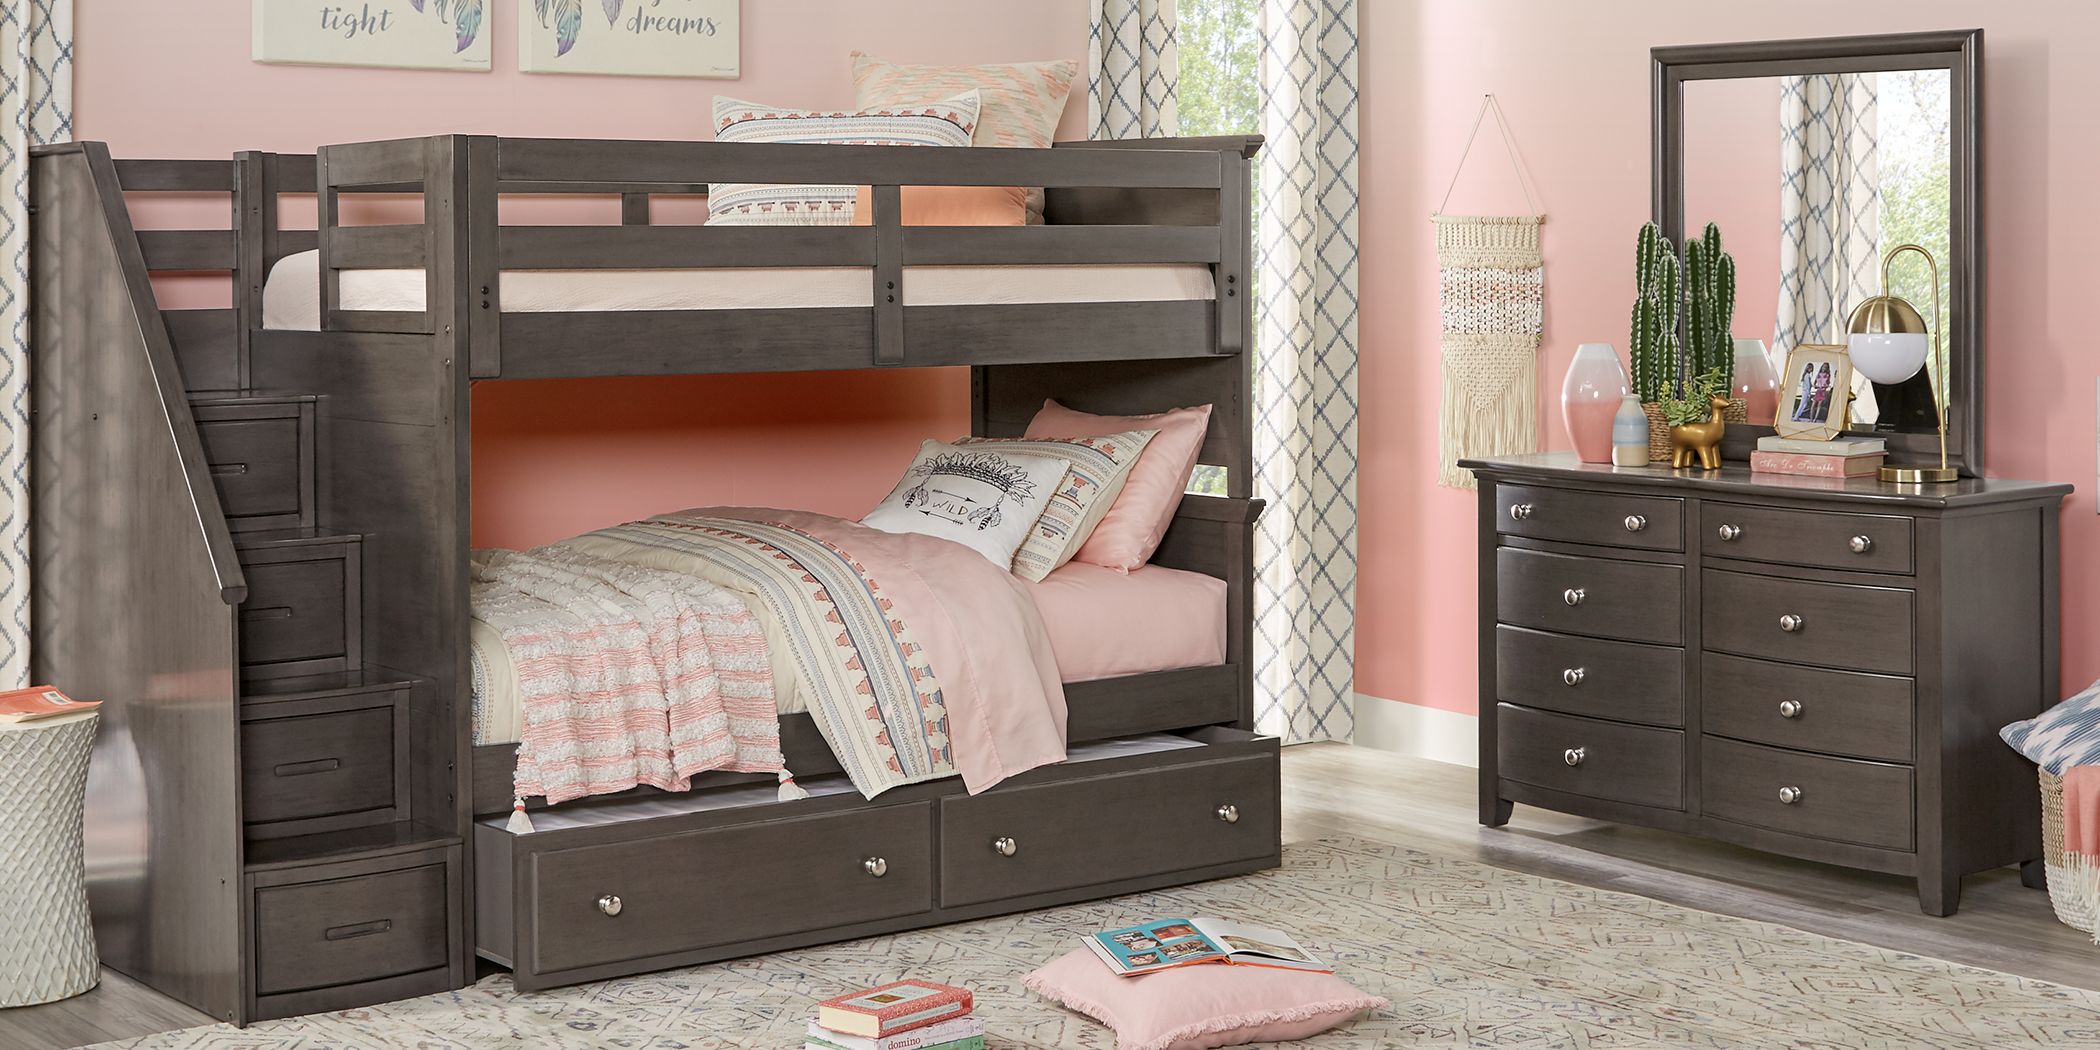 White Bunk Bed Bedroom Sets Cheaper Than Retail Price Buy Clothing Accessories And Lifestyle Products For Women Men